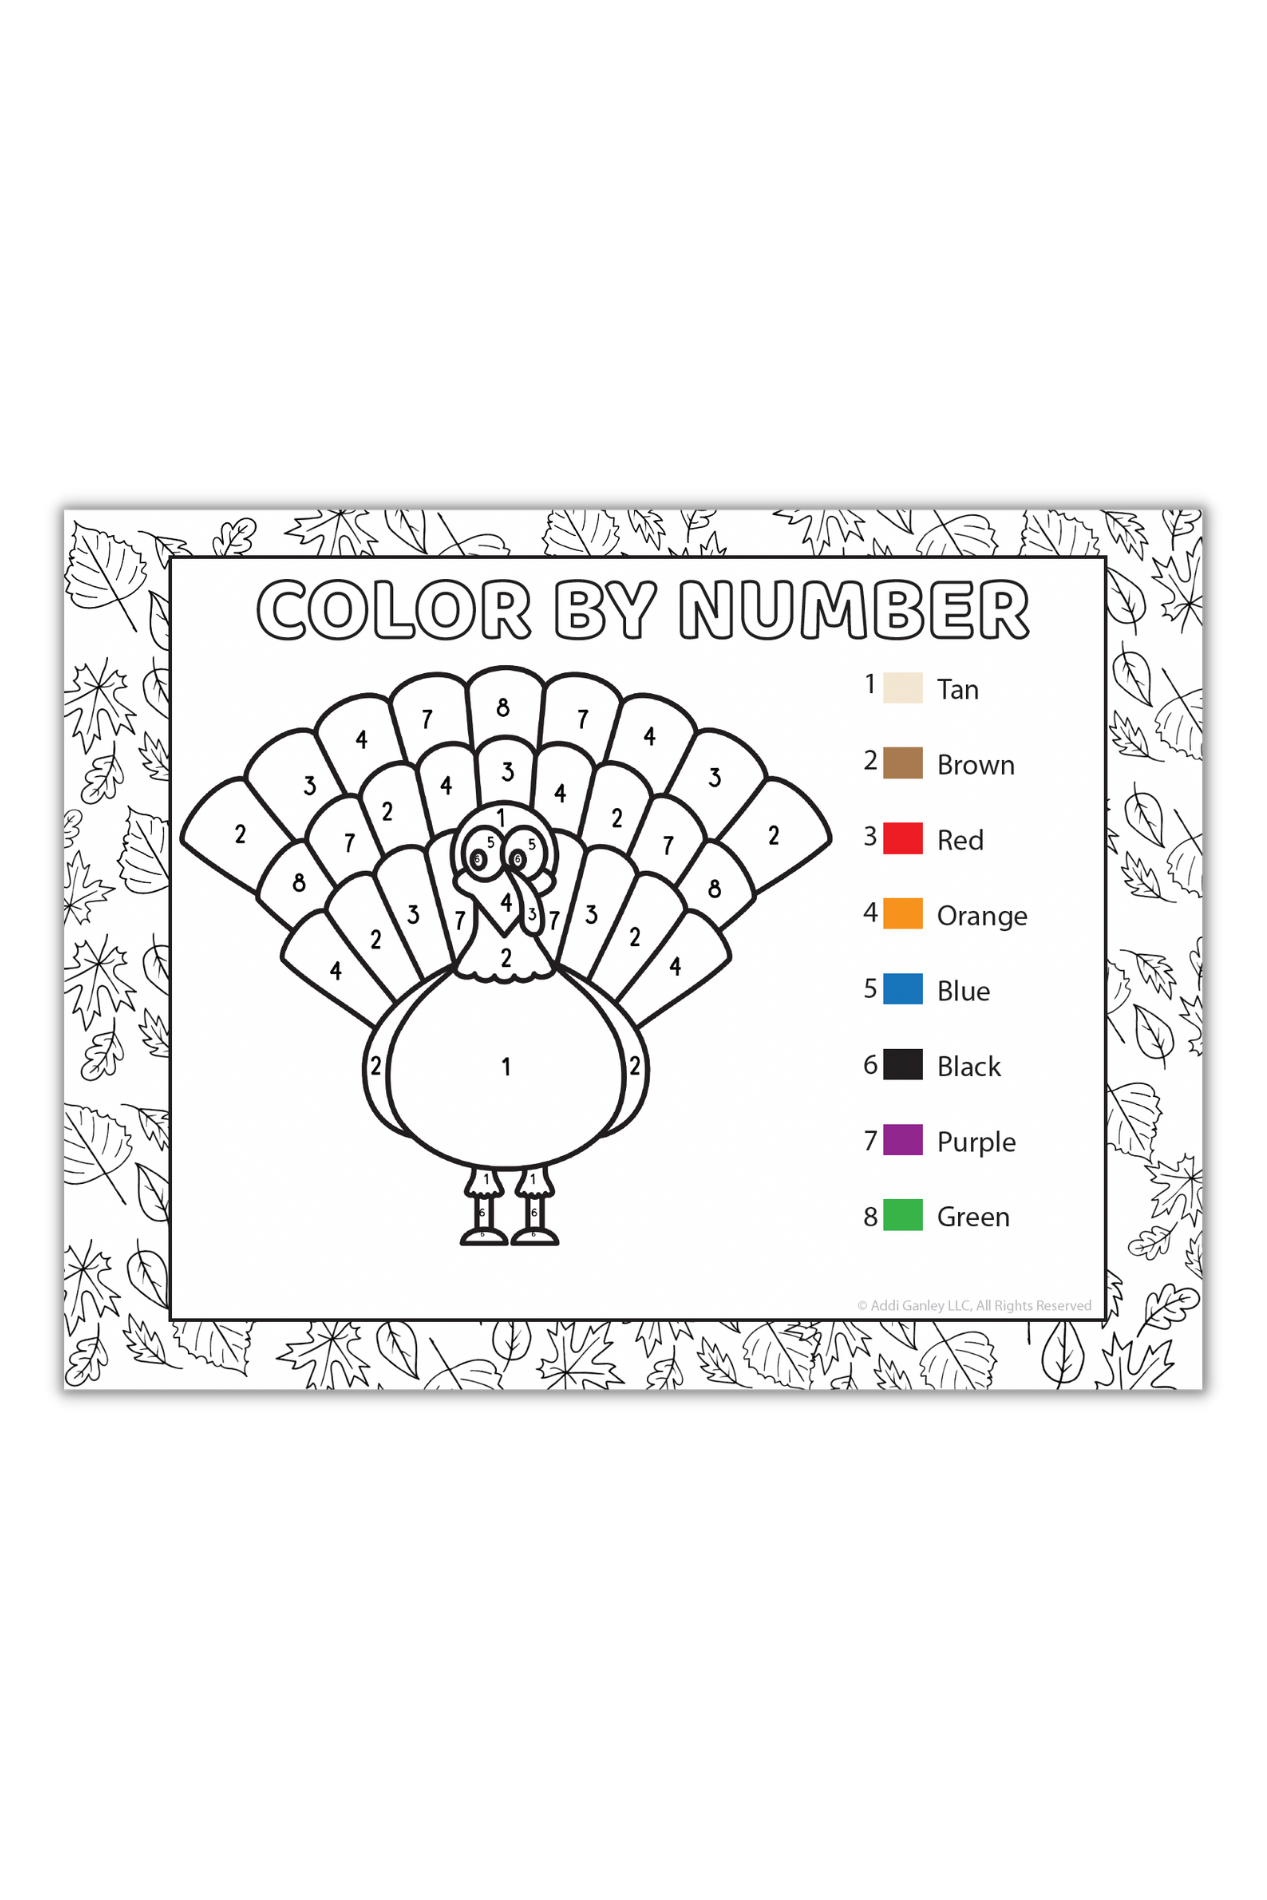 Kids Thanksgiving Activity Pack